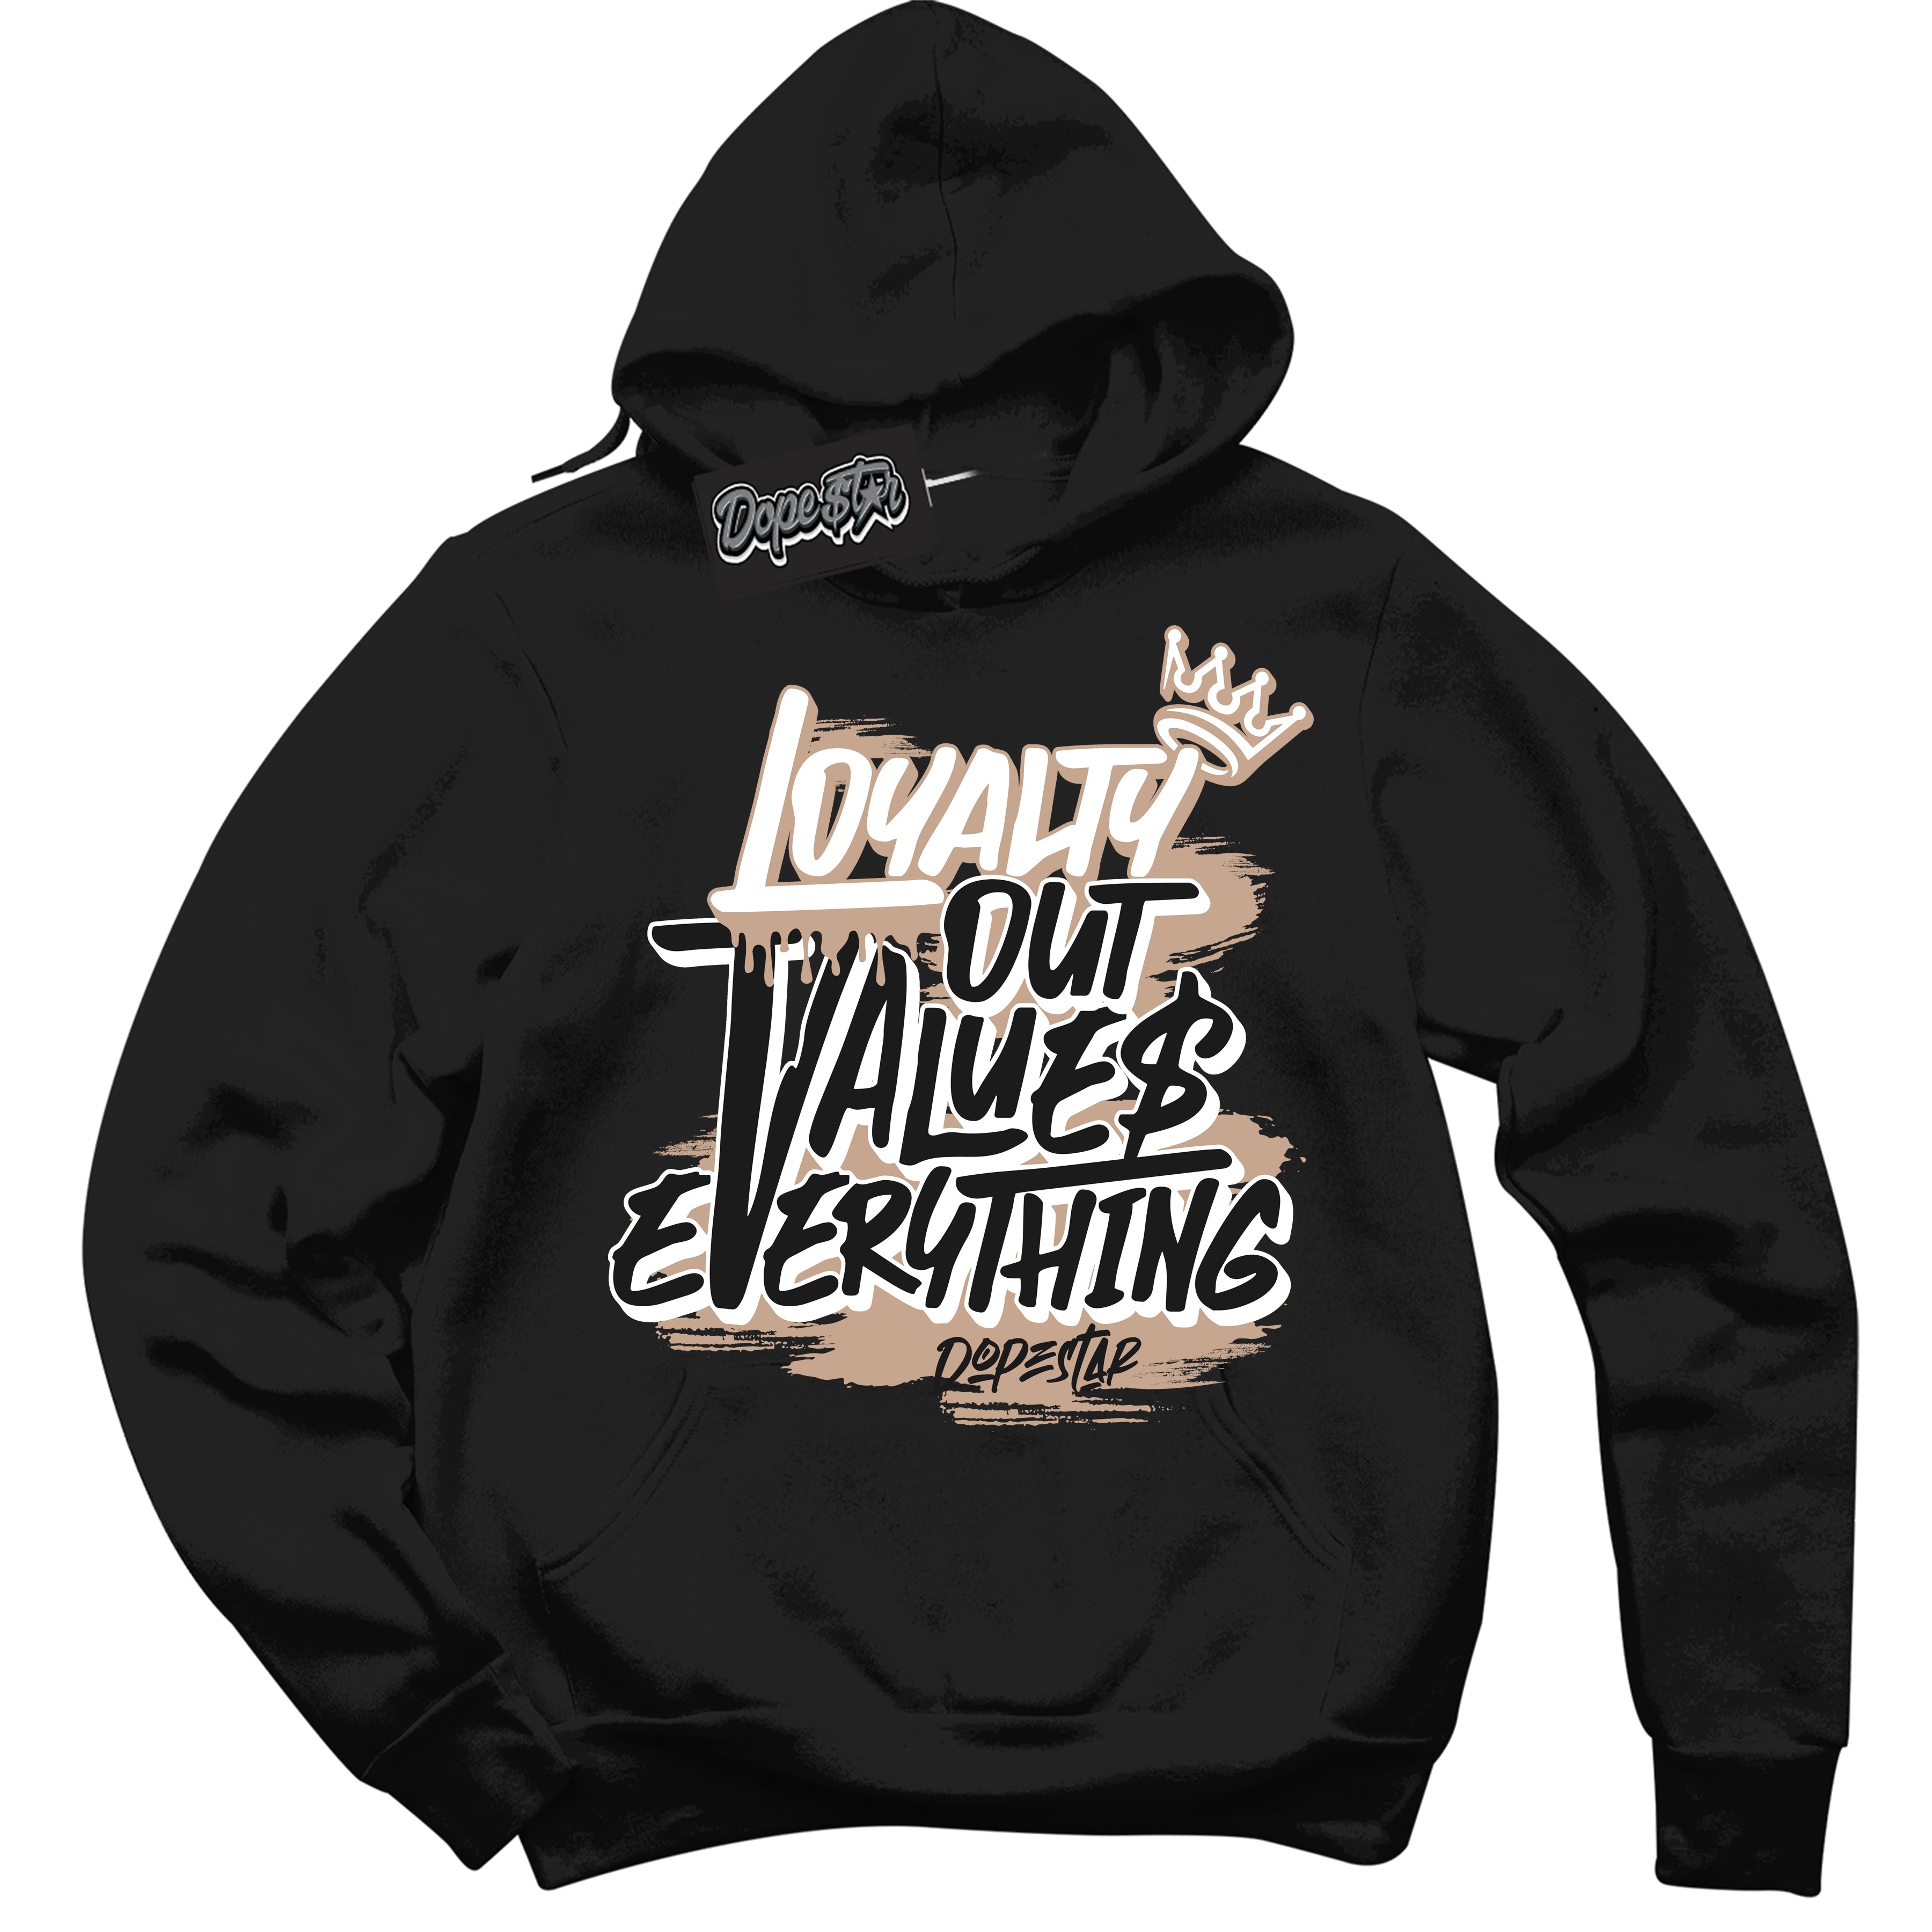 Cool Black Hoodie with “ Loyalty Out Values Everything ”  design that Perfectly Matches  Gratitude 11s Sneakers.